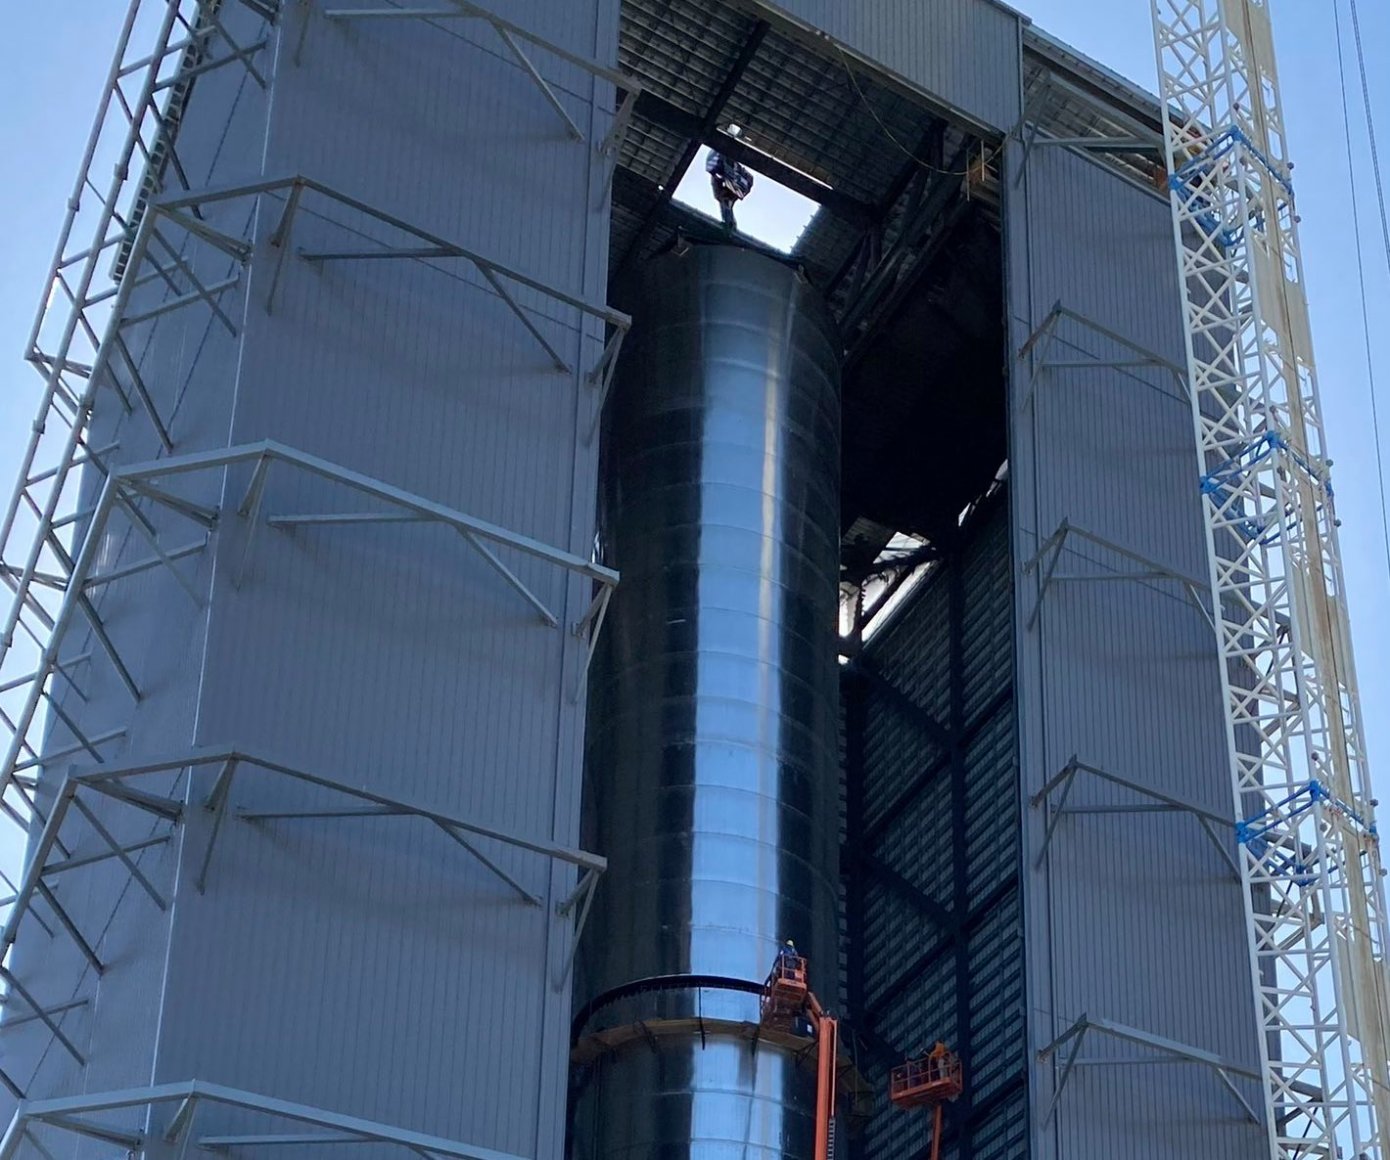 SpaceX final assembly of first massive testing rocket booster for Starship